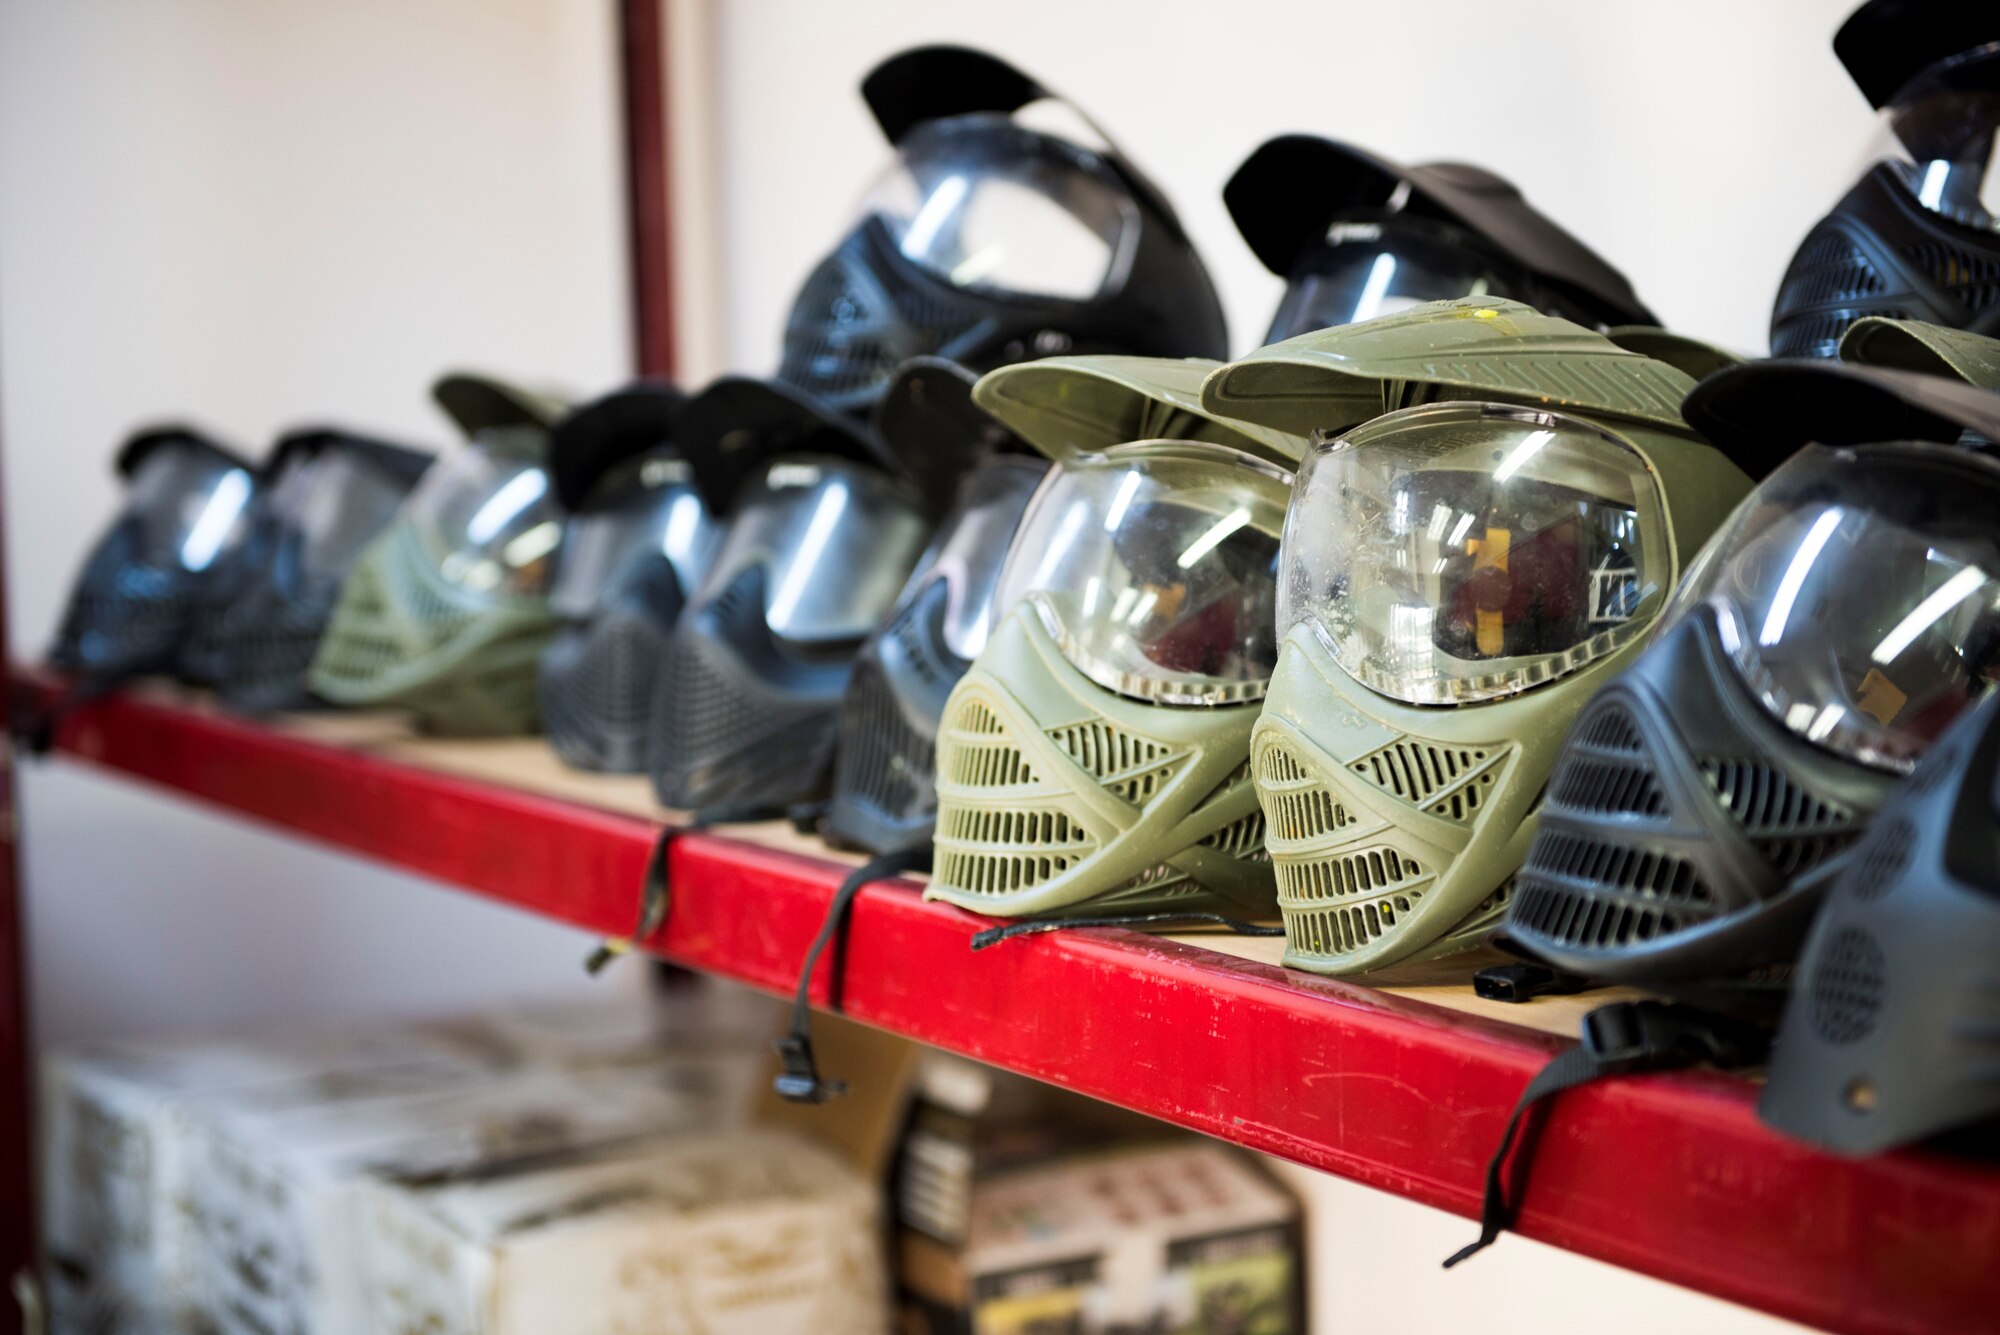 Paintball helmets sit on display at the Outdoor Recreation Center